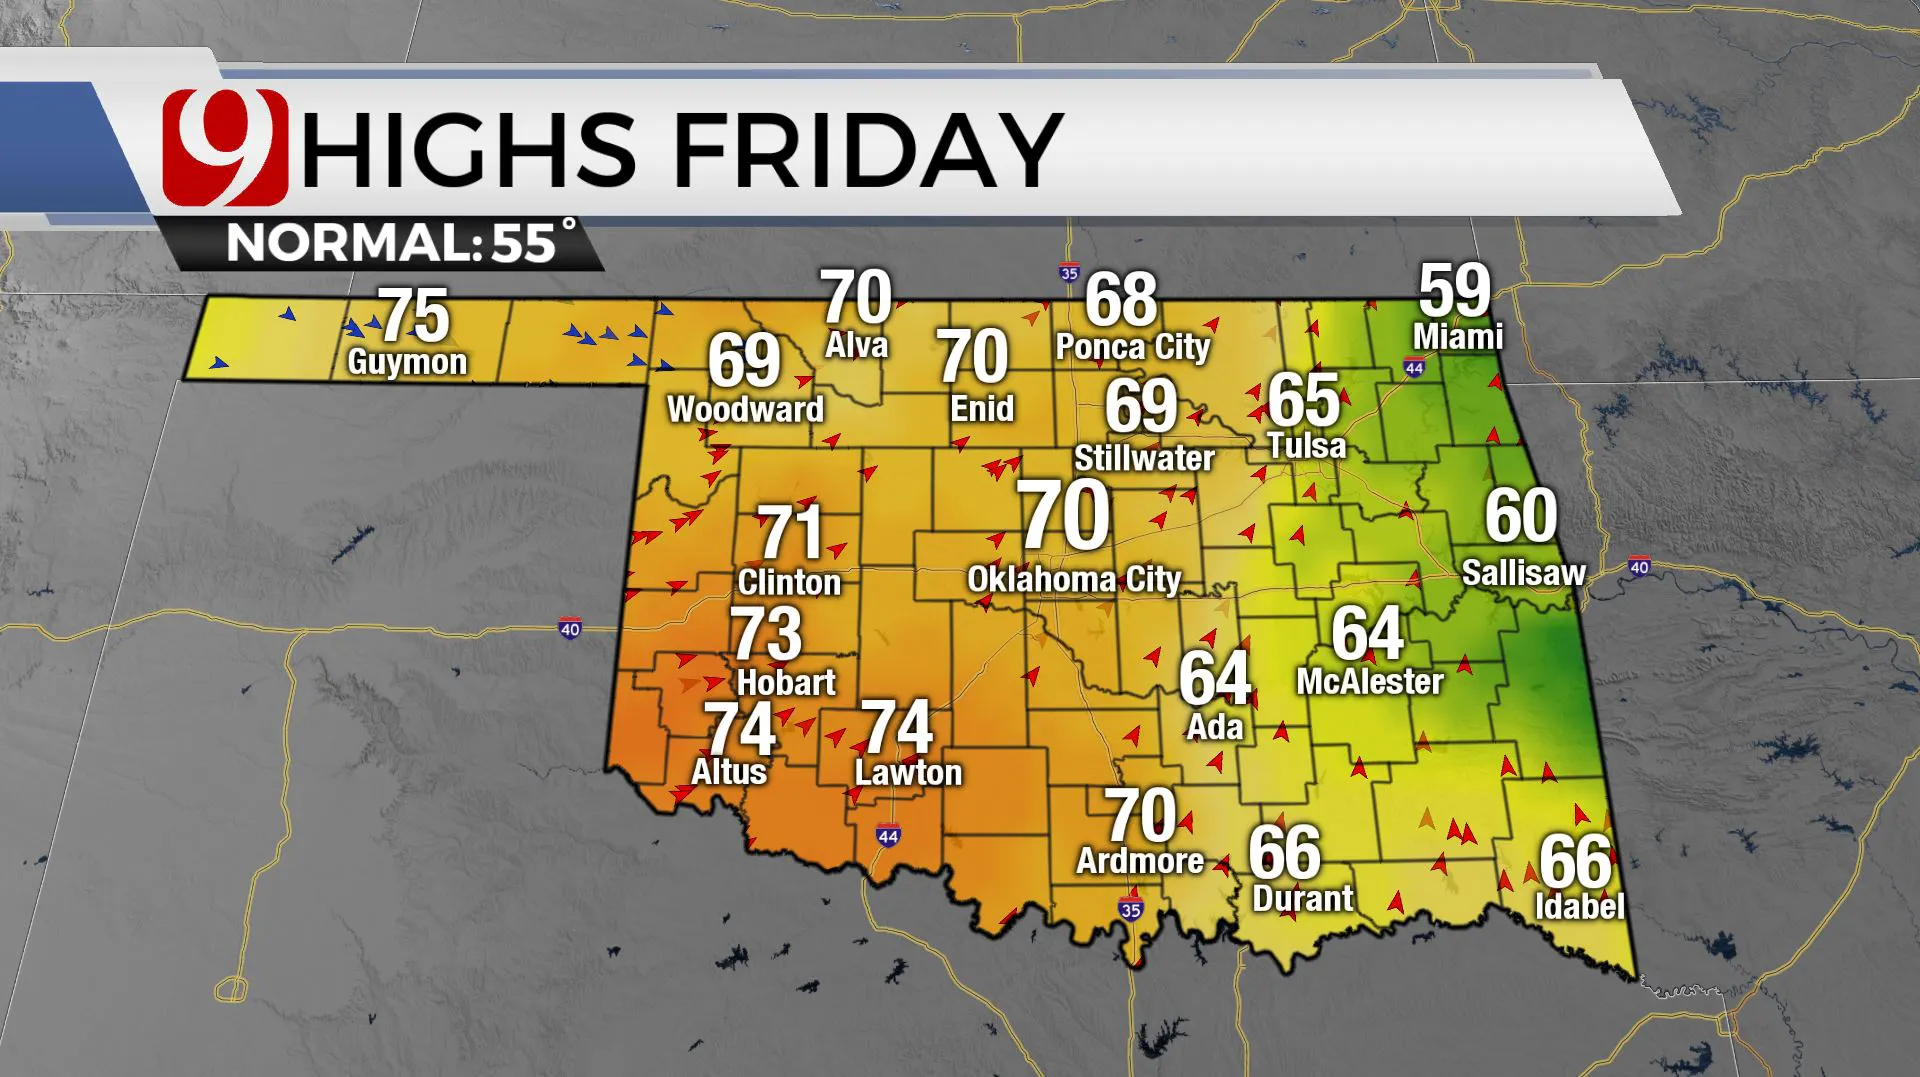 Highs on Friday across the state.